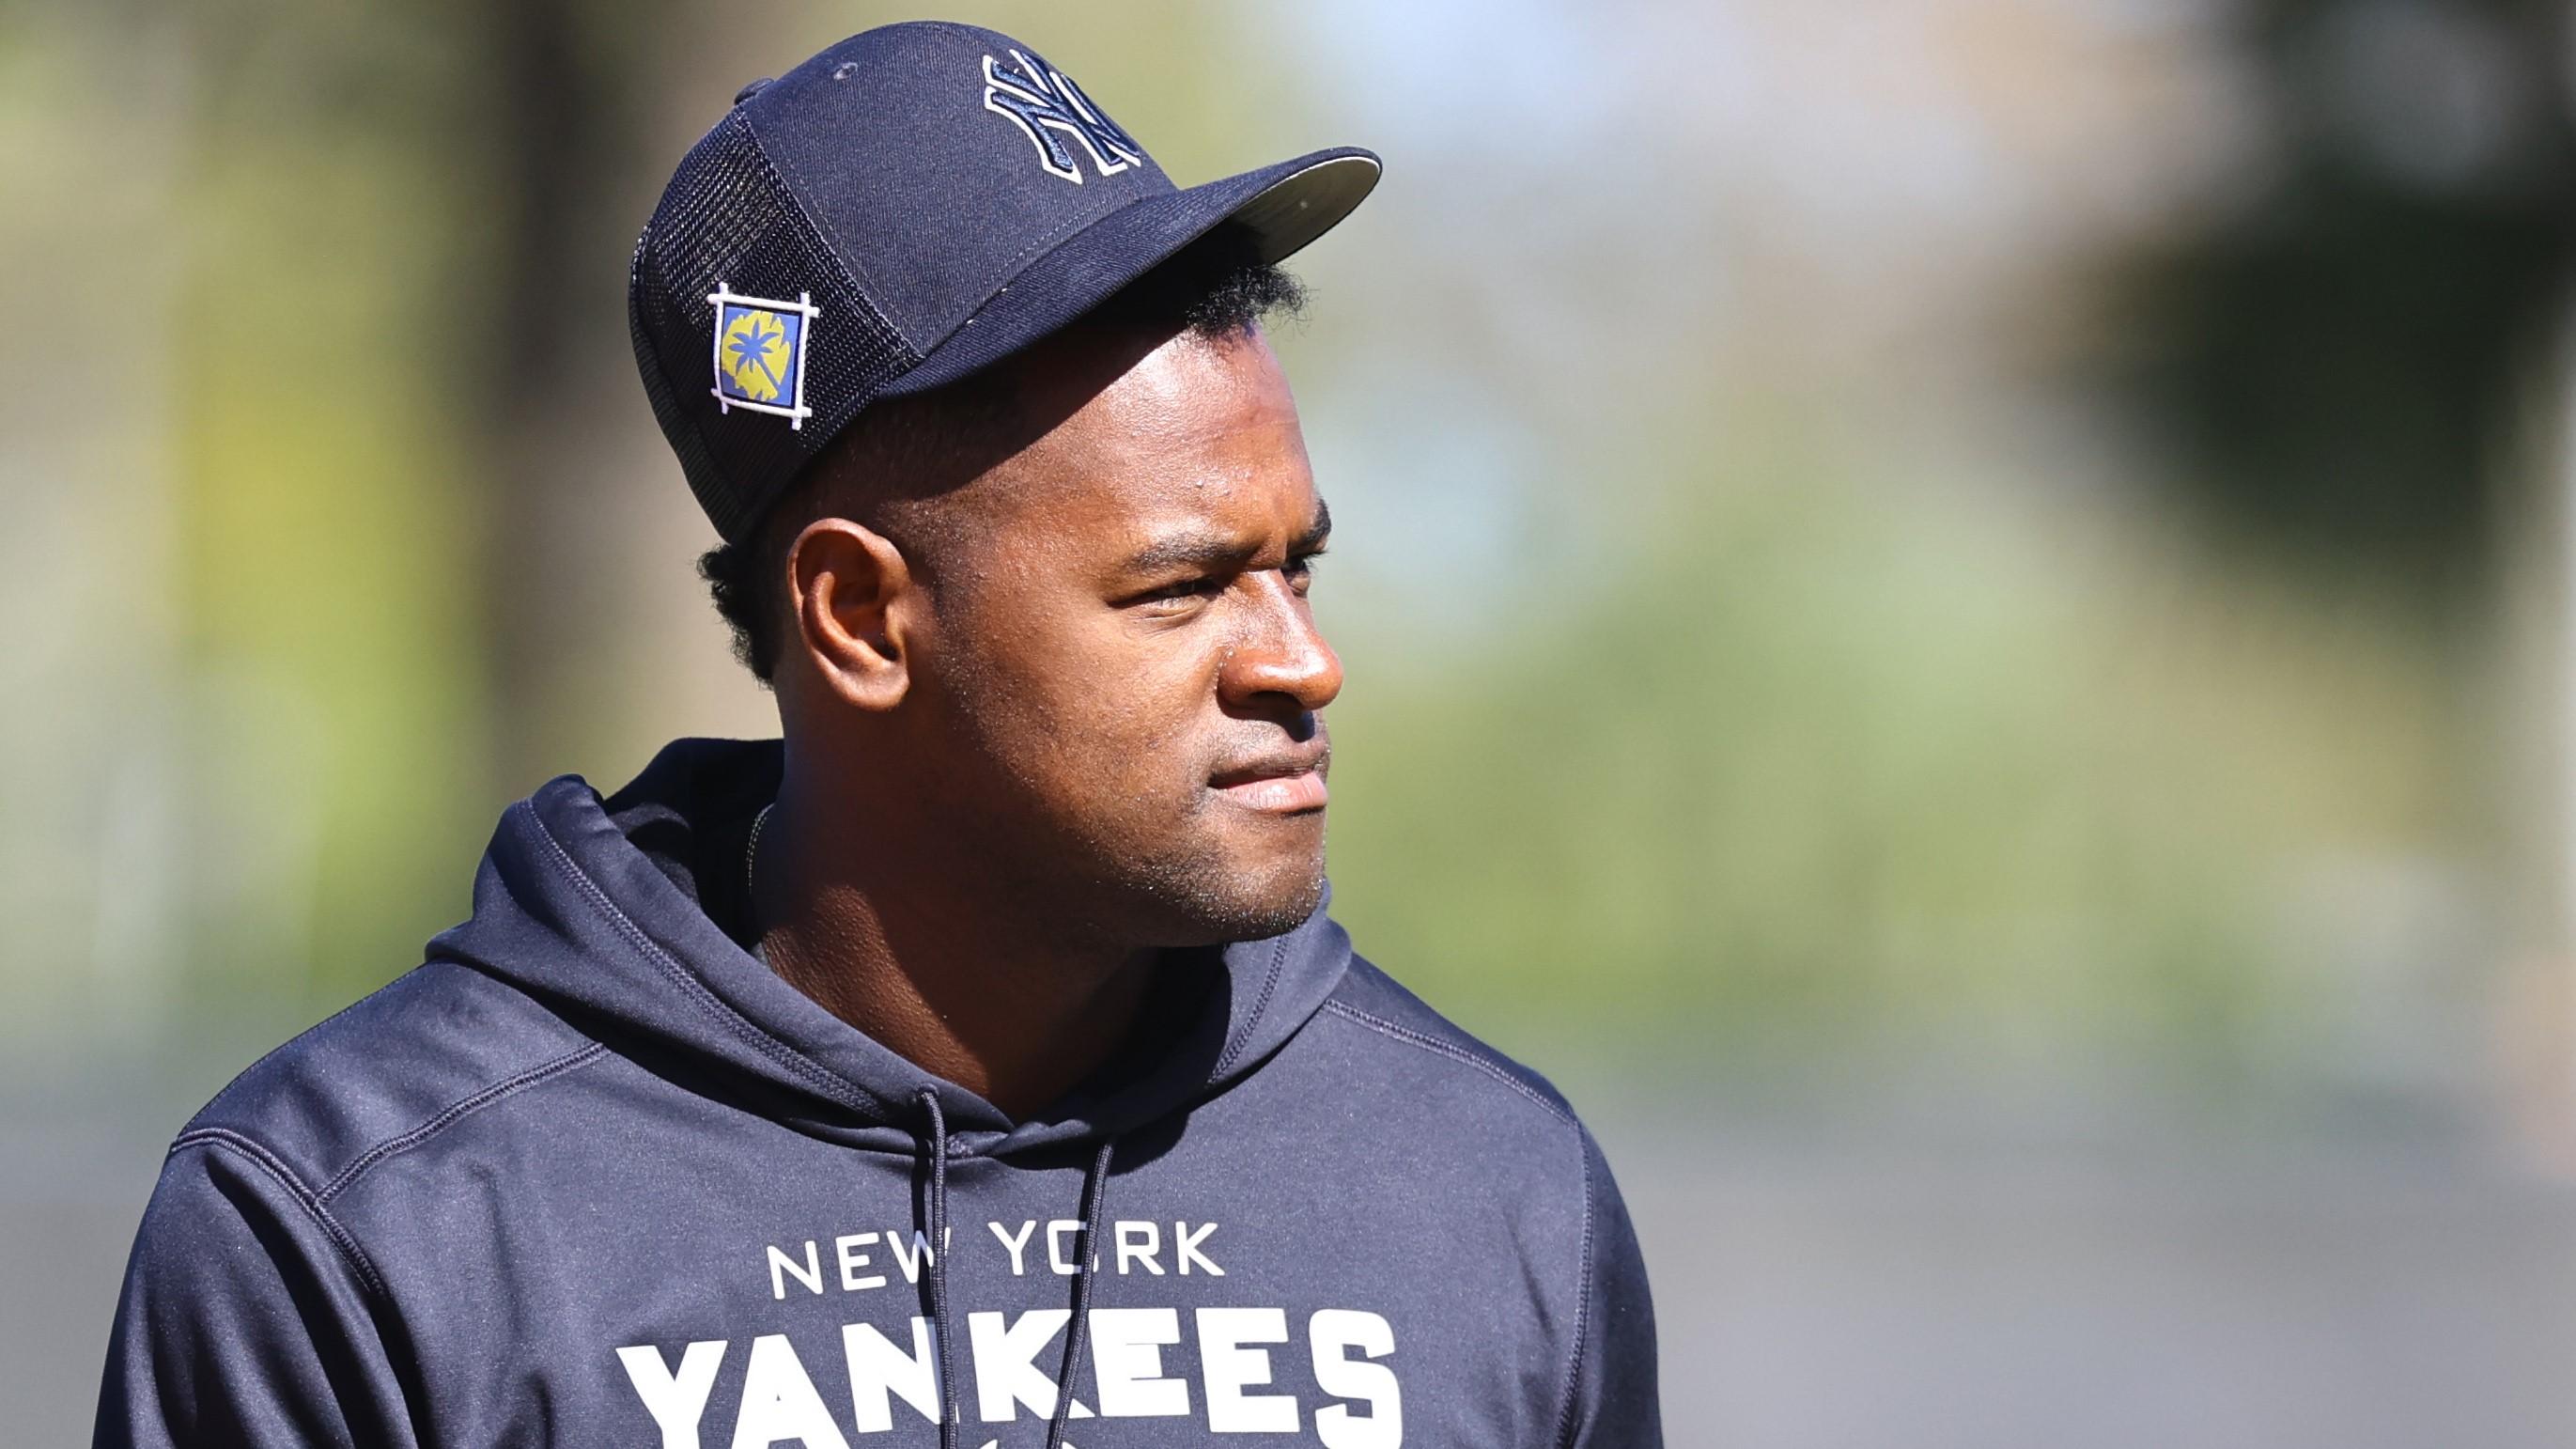 Mar 14, 2022; Tampa, FL, USA; New York Yankees starting pitcher Luis Severino (40) during spring training workouts at George M. Steinbrenner Field. Mandatory Credit: Kim Klement-USA TODAY Sports / Kim Klement-USA TODAY Sports